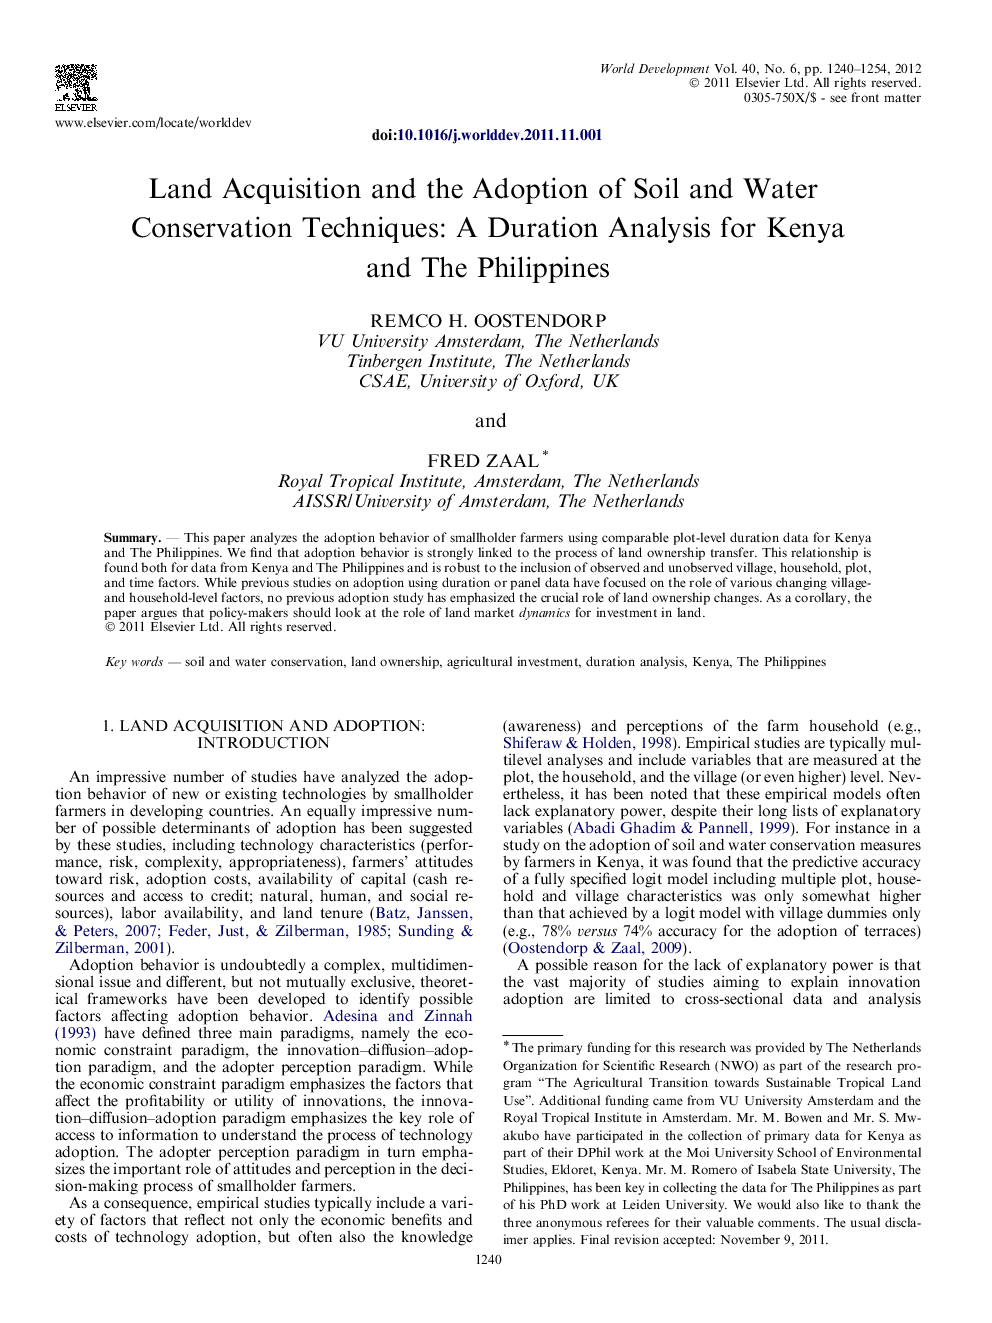 Land Acquisition and the Adoption of Soil and Water Conservation Techniques: A Duration Analysis for Kenya and The Philippines